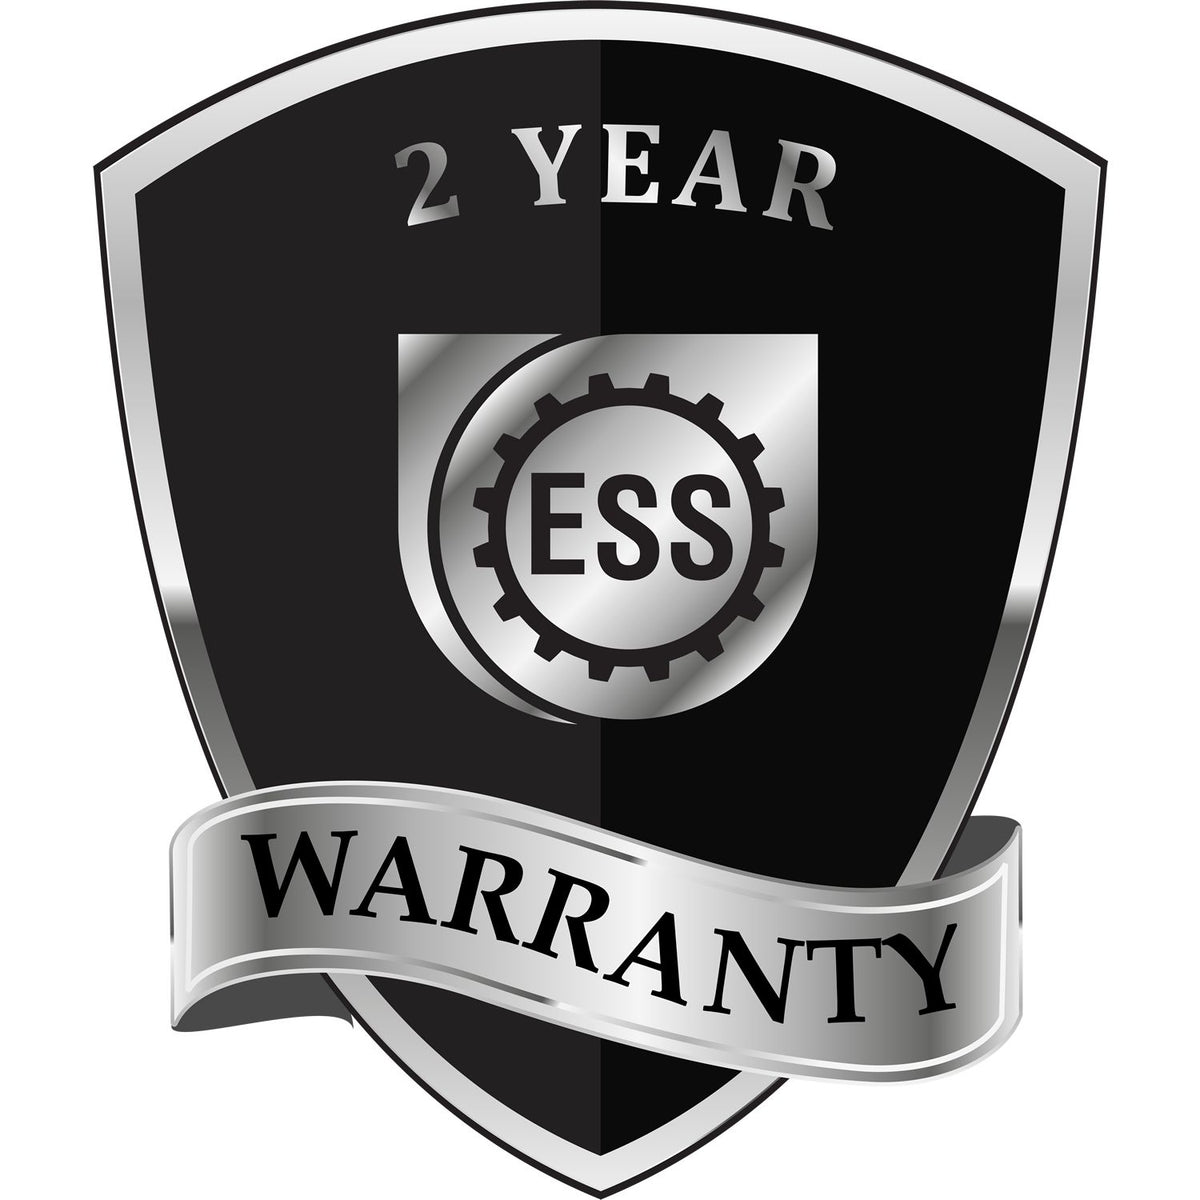 A badge or emblem showing a warranty icon for the Extended Long Reach Montana Surveyor Embosser